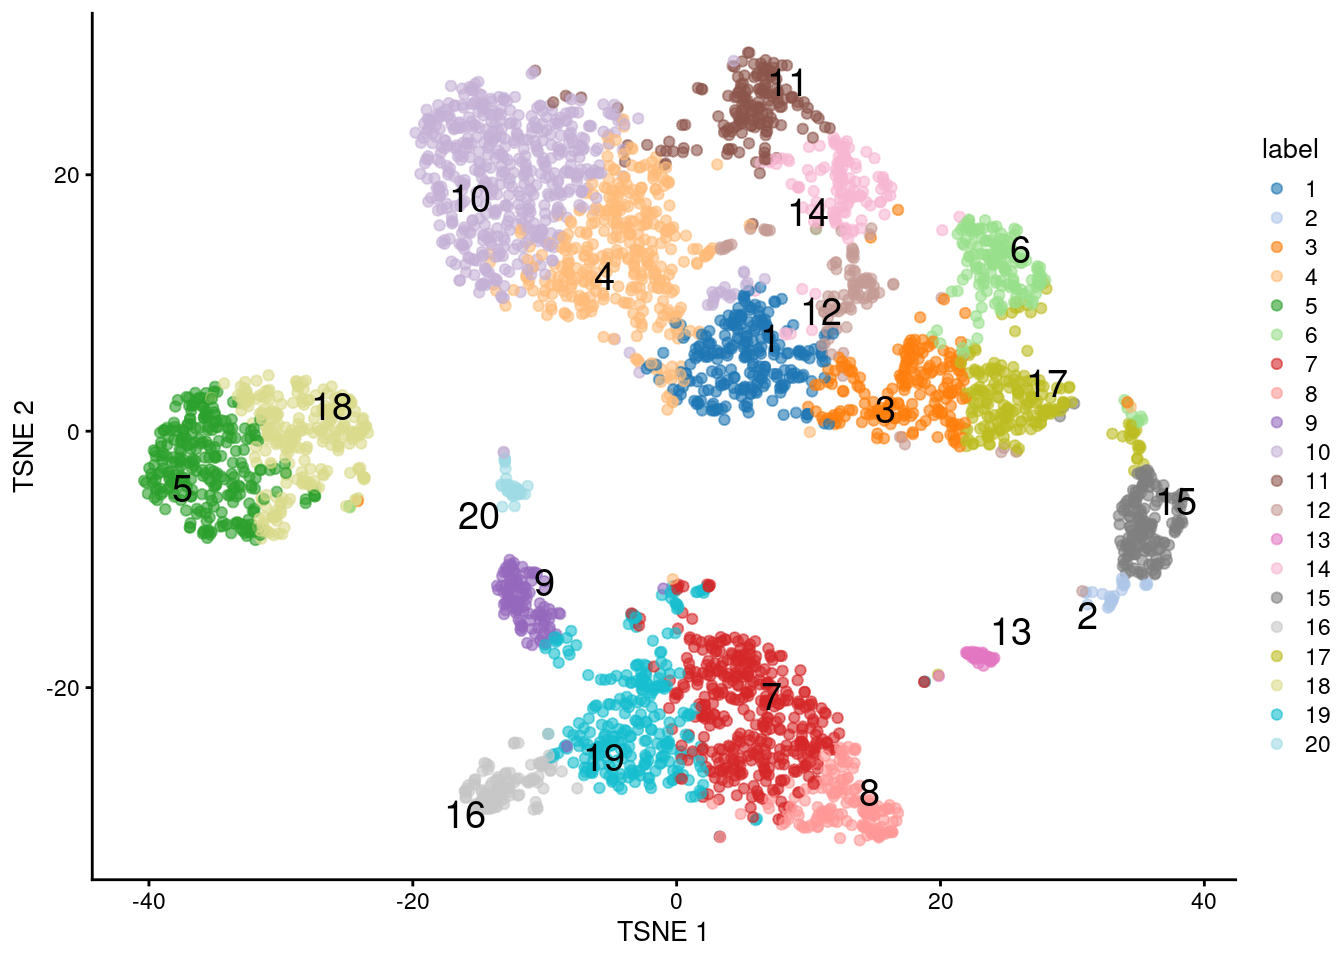 $t$-SNE plot of the 10X PBMC dataset, where each point represents a cell and is coloured according to the identity of the assigned cluster from $k$-means clustering with $k=20$.